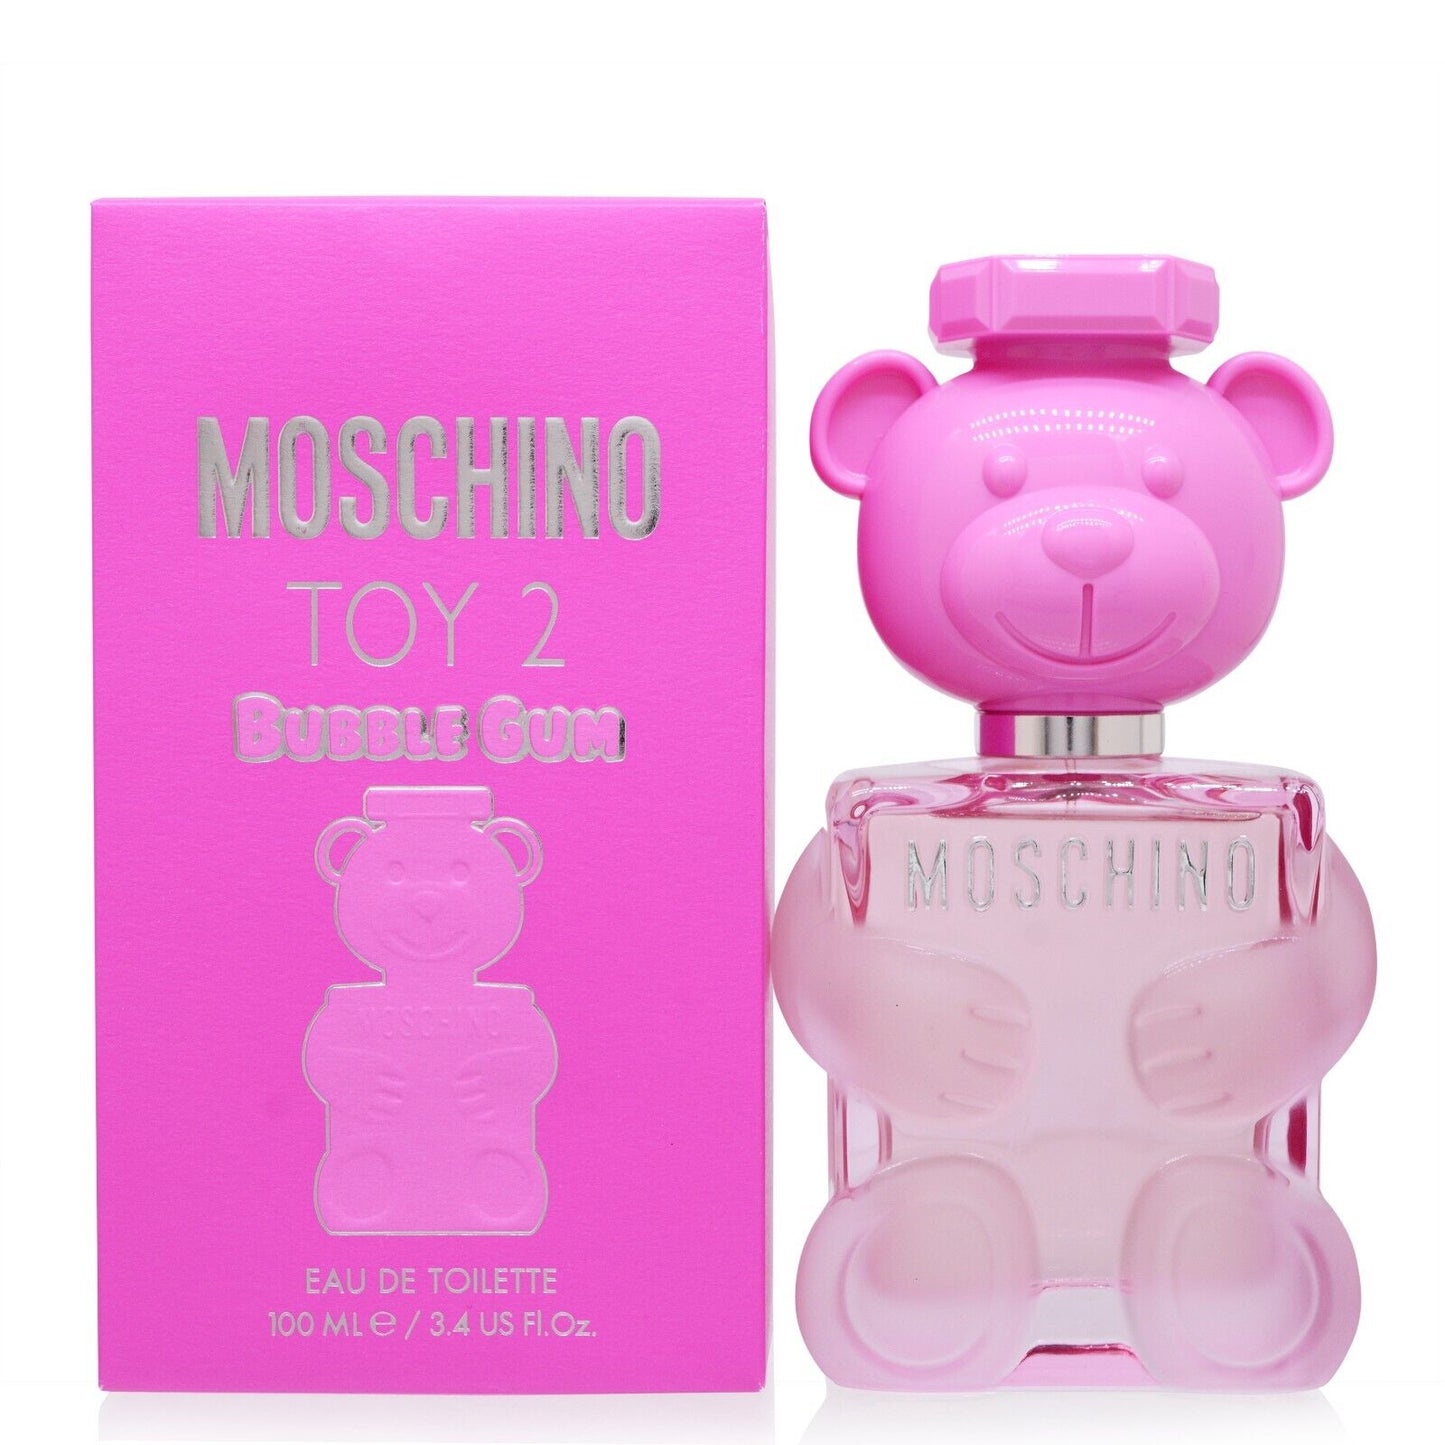 Moschino Toy 2 Bubble Gum for Women Edt